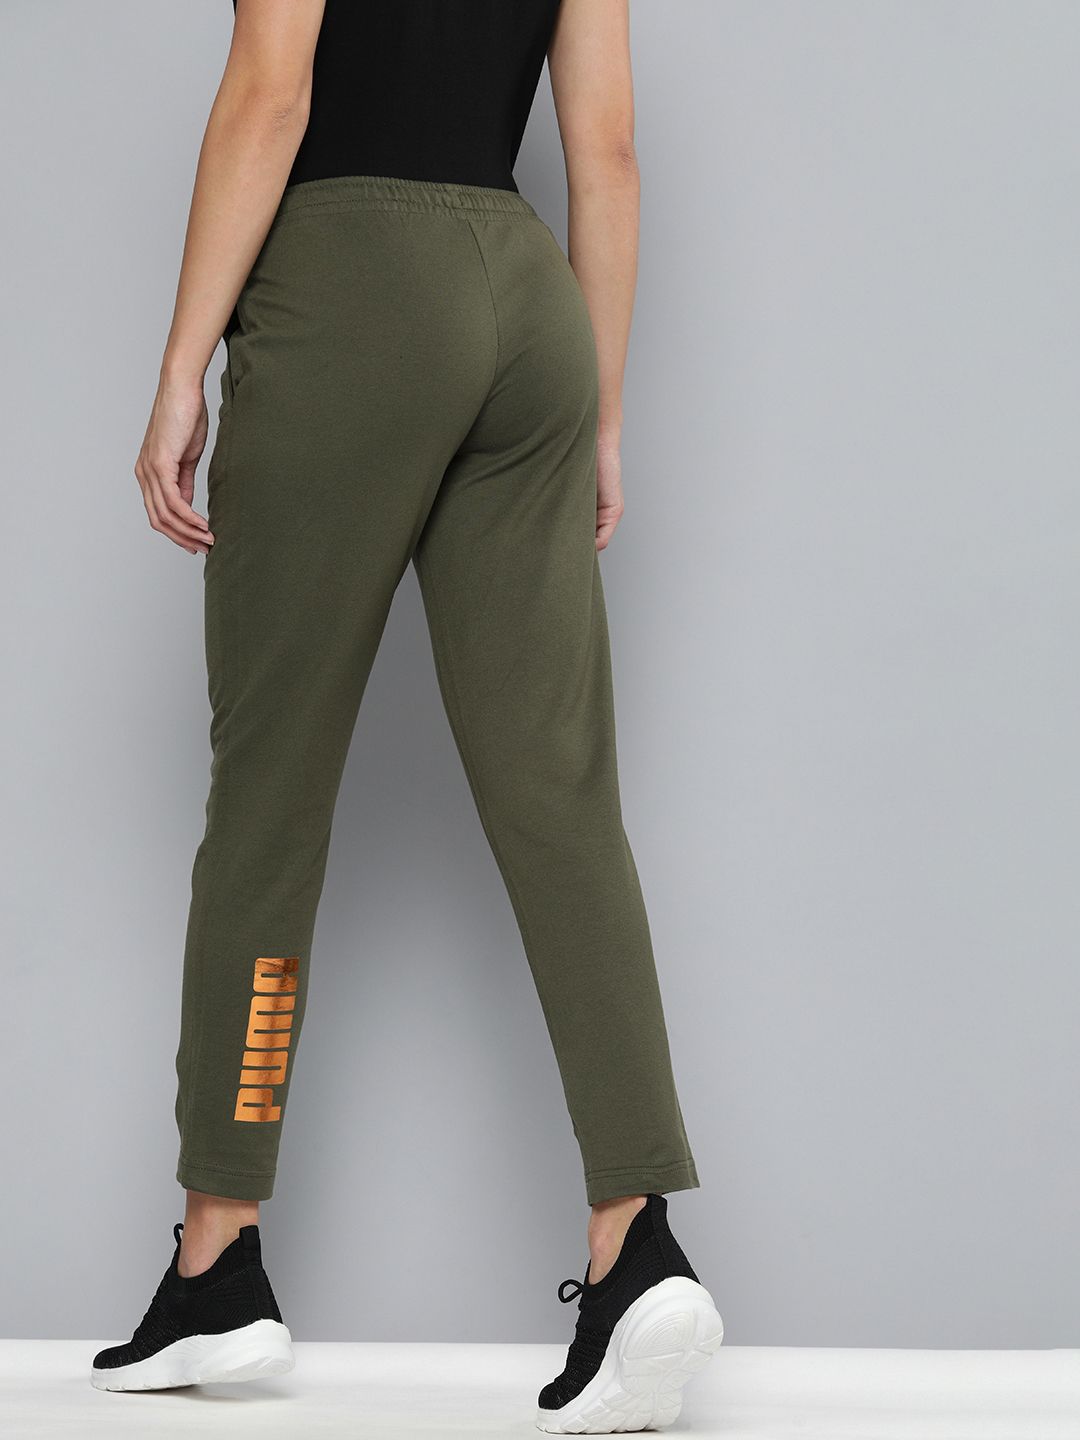 Puma Women Olive Green Printed Knitted Cropped Track Pants Price in India